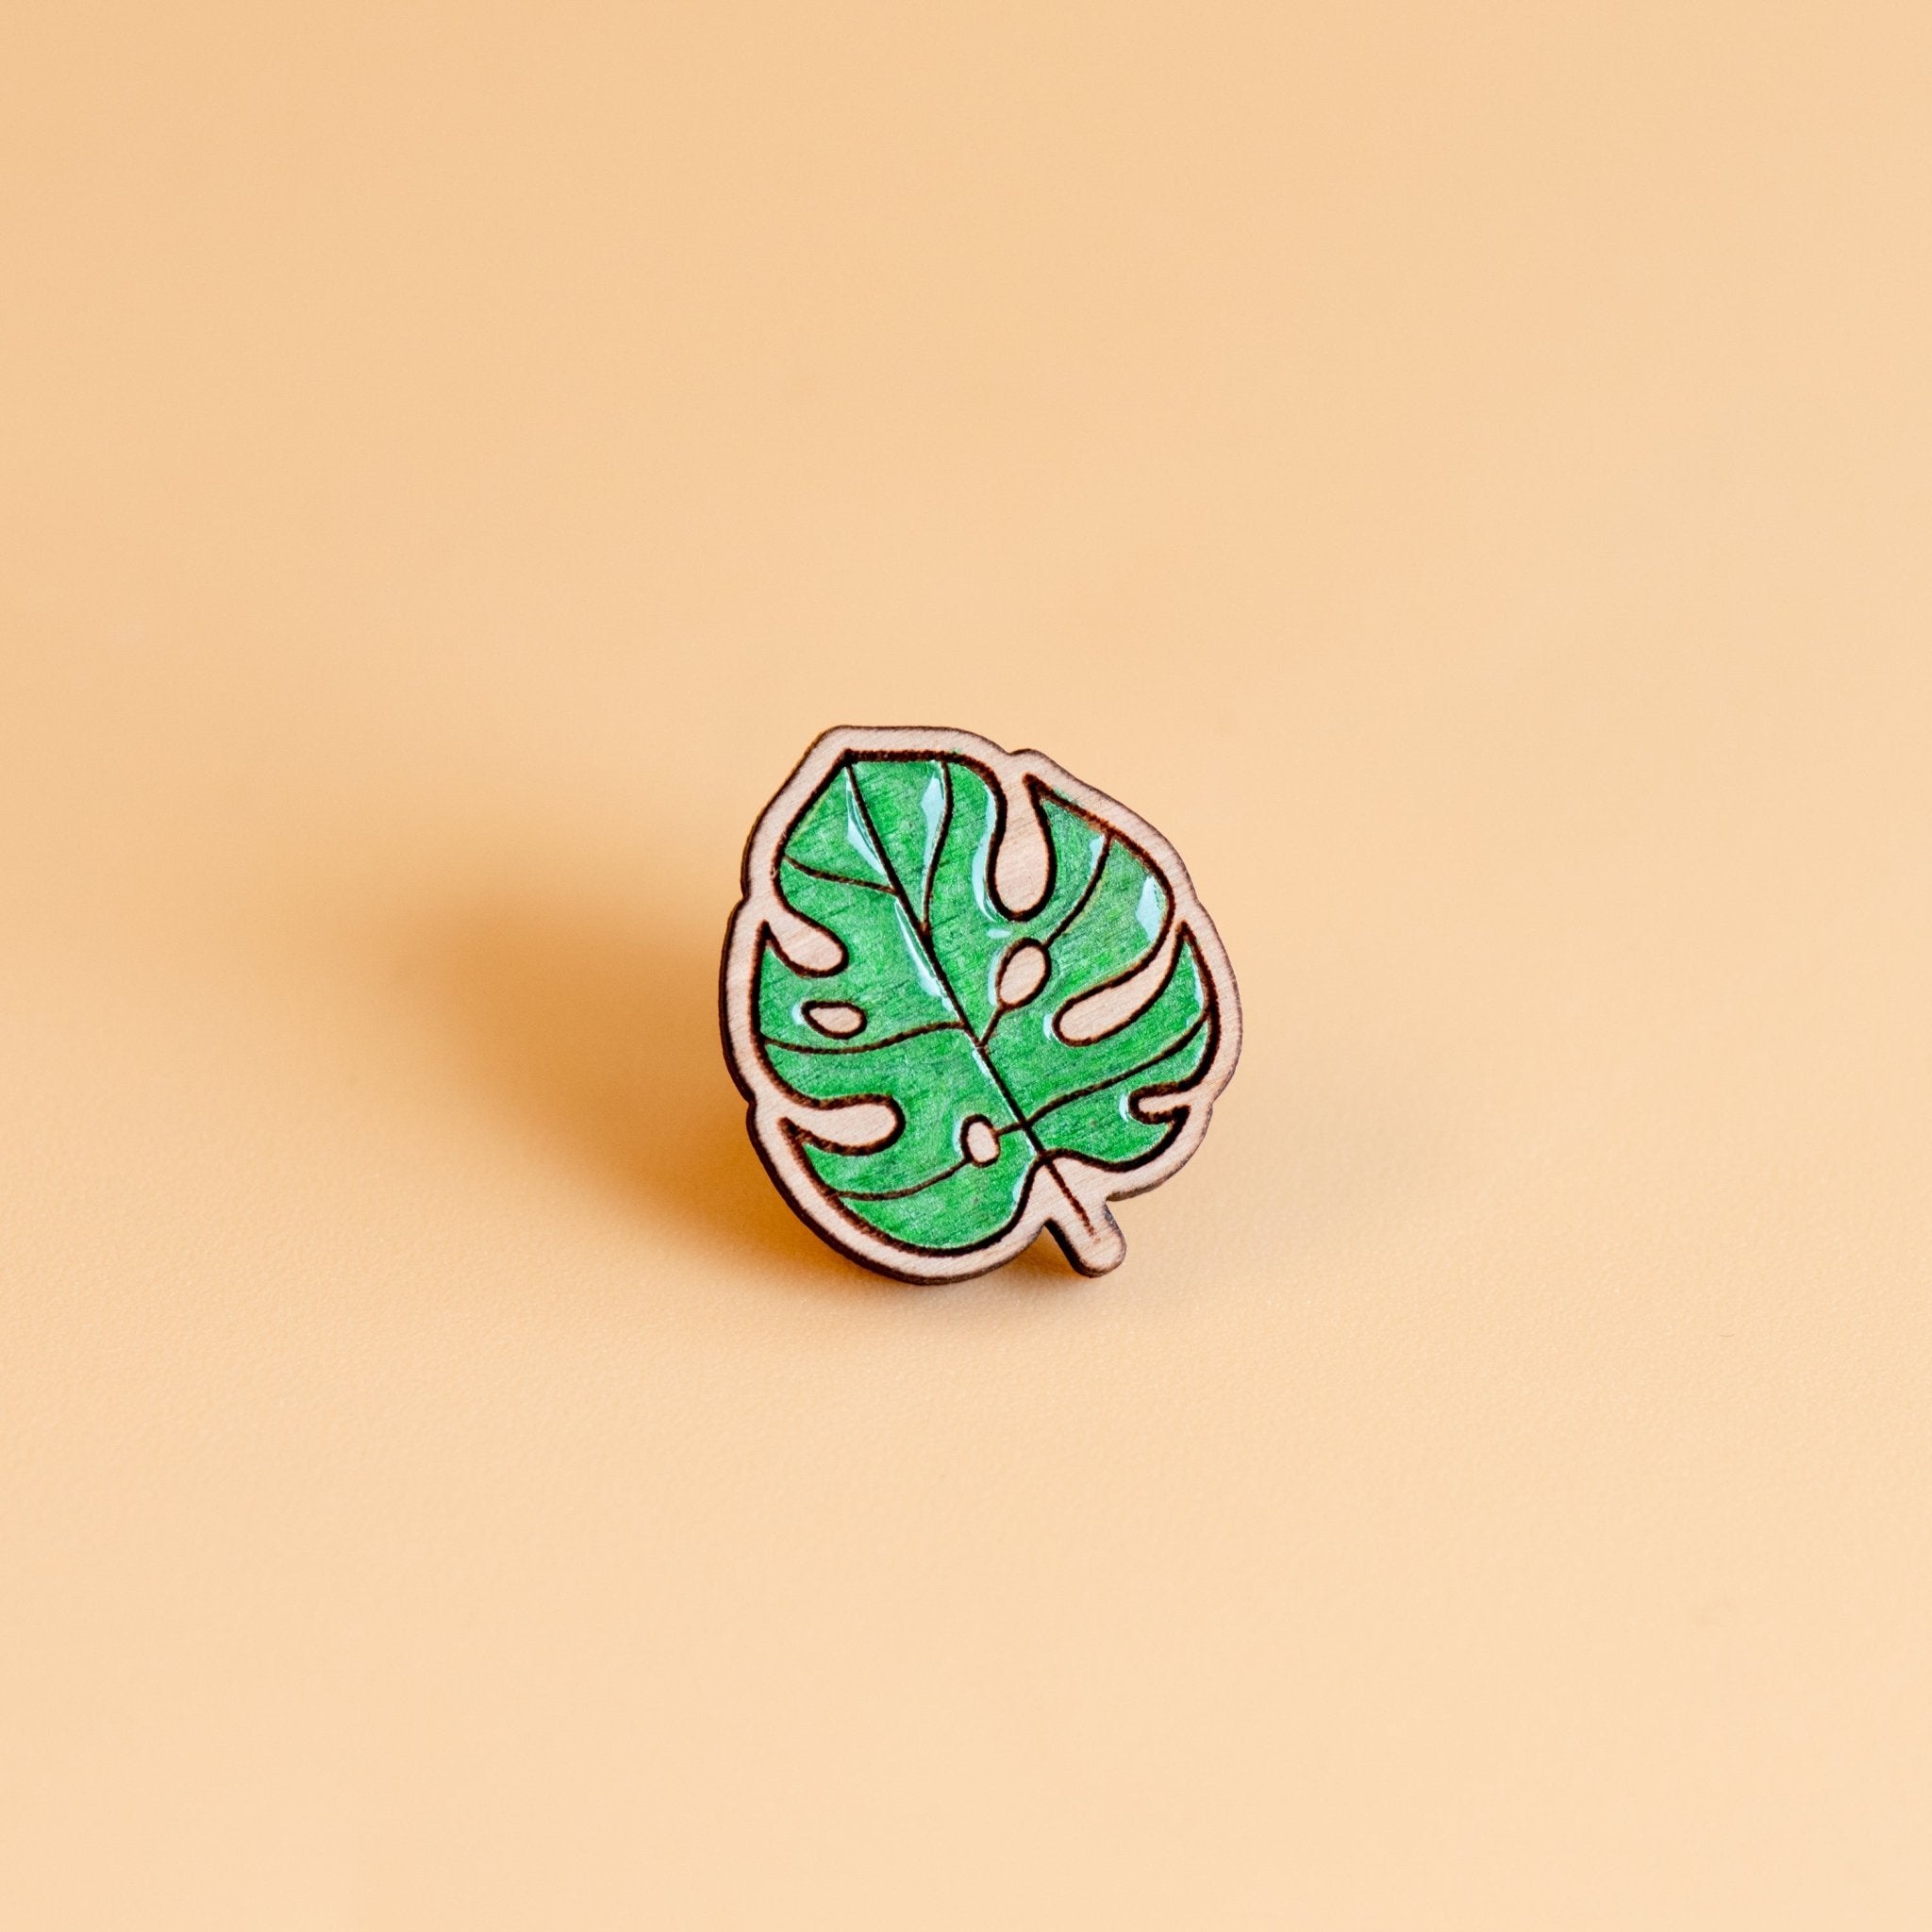 Hand-painted Swiss Cheese Plant Monstera Leaf Cherry Wood Pin Badge - PO44086 - Robin Valley Official Store